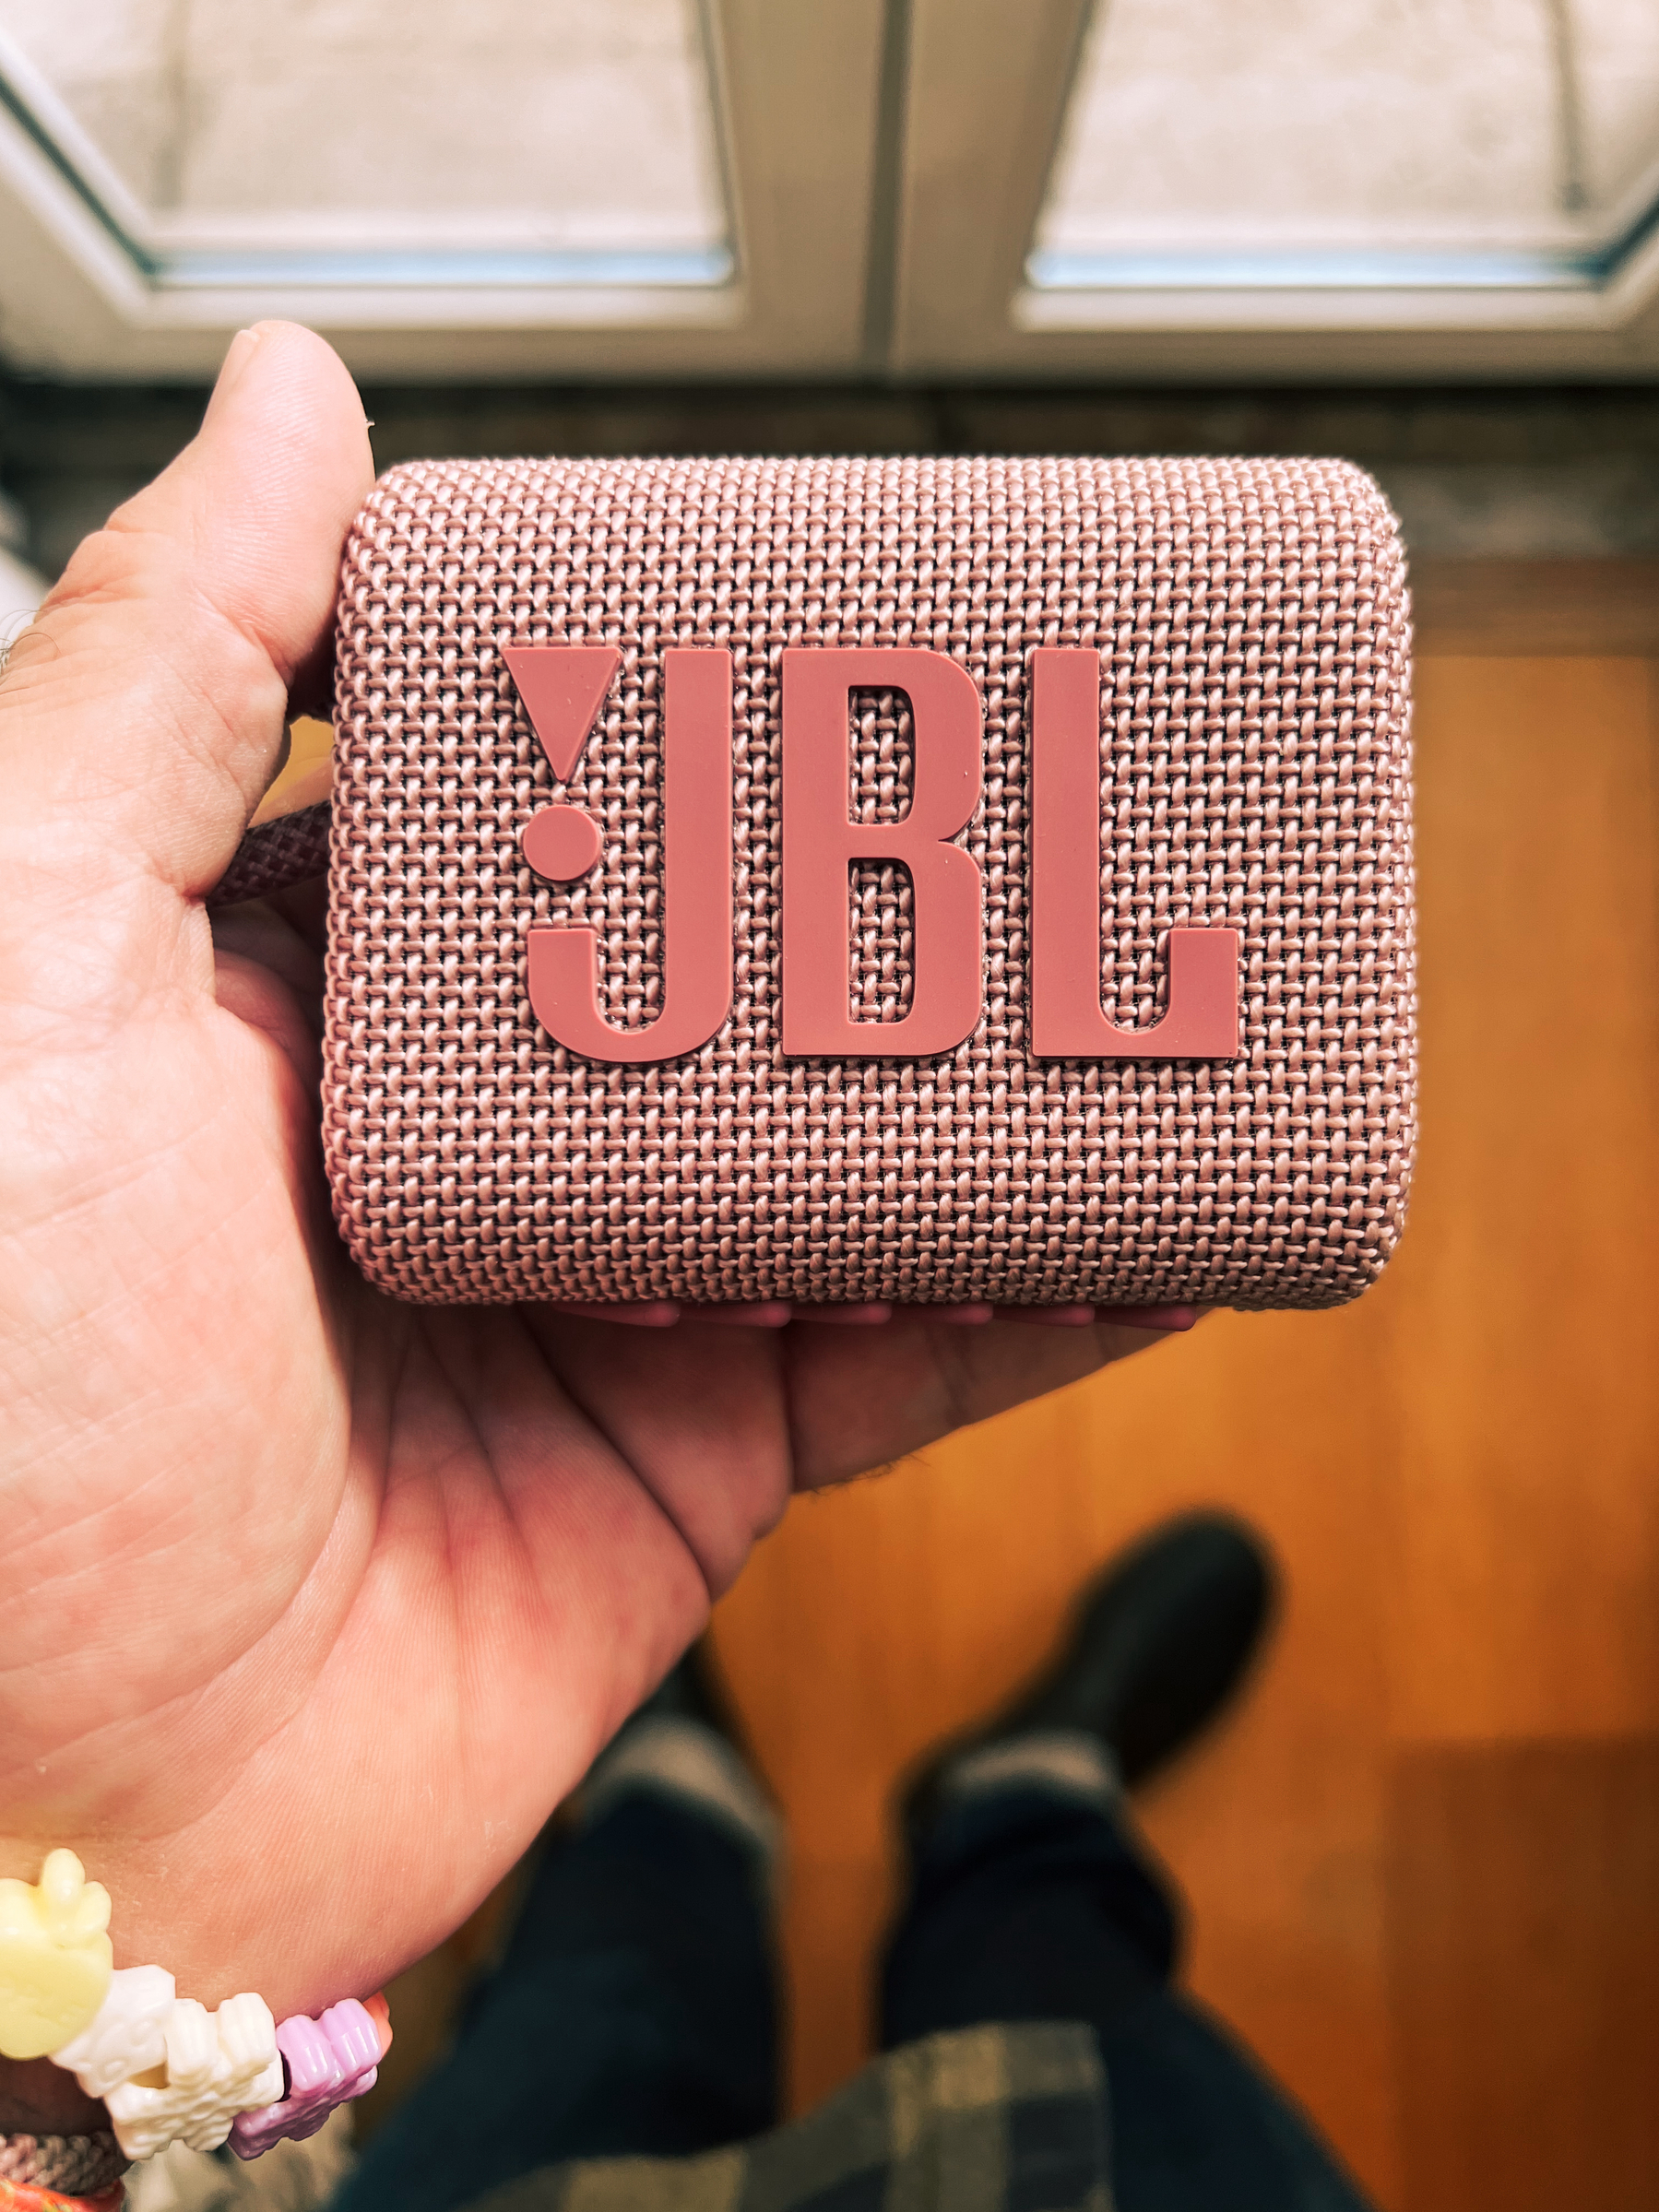 A close-up of a hand holding a pink JBL portable Bluetooth speaker.